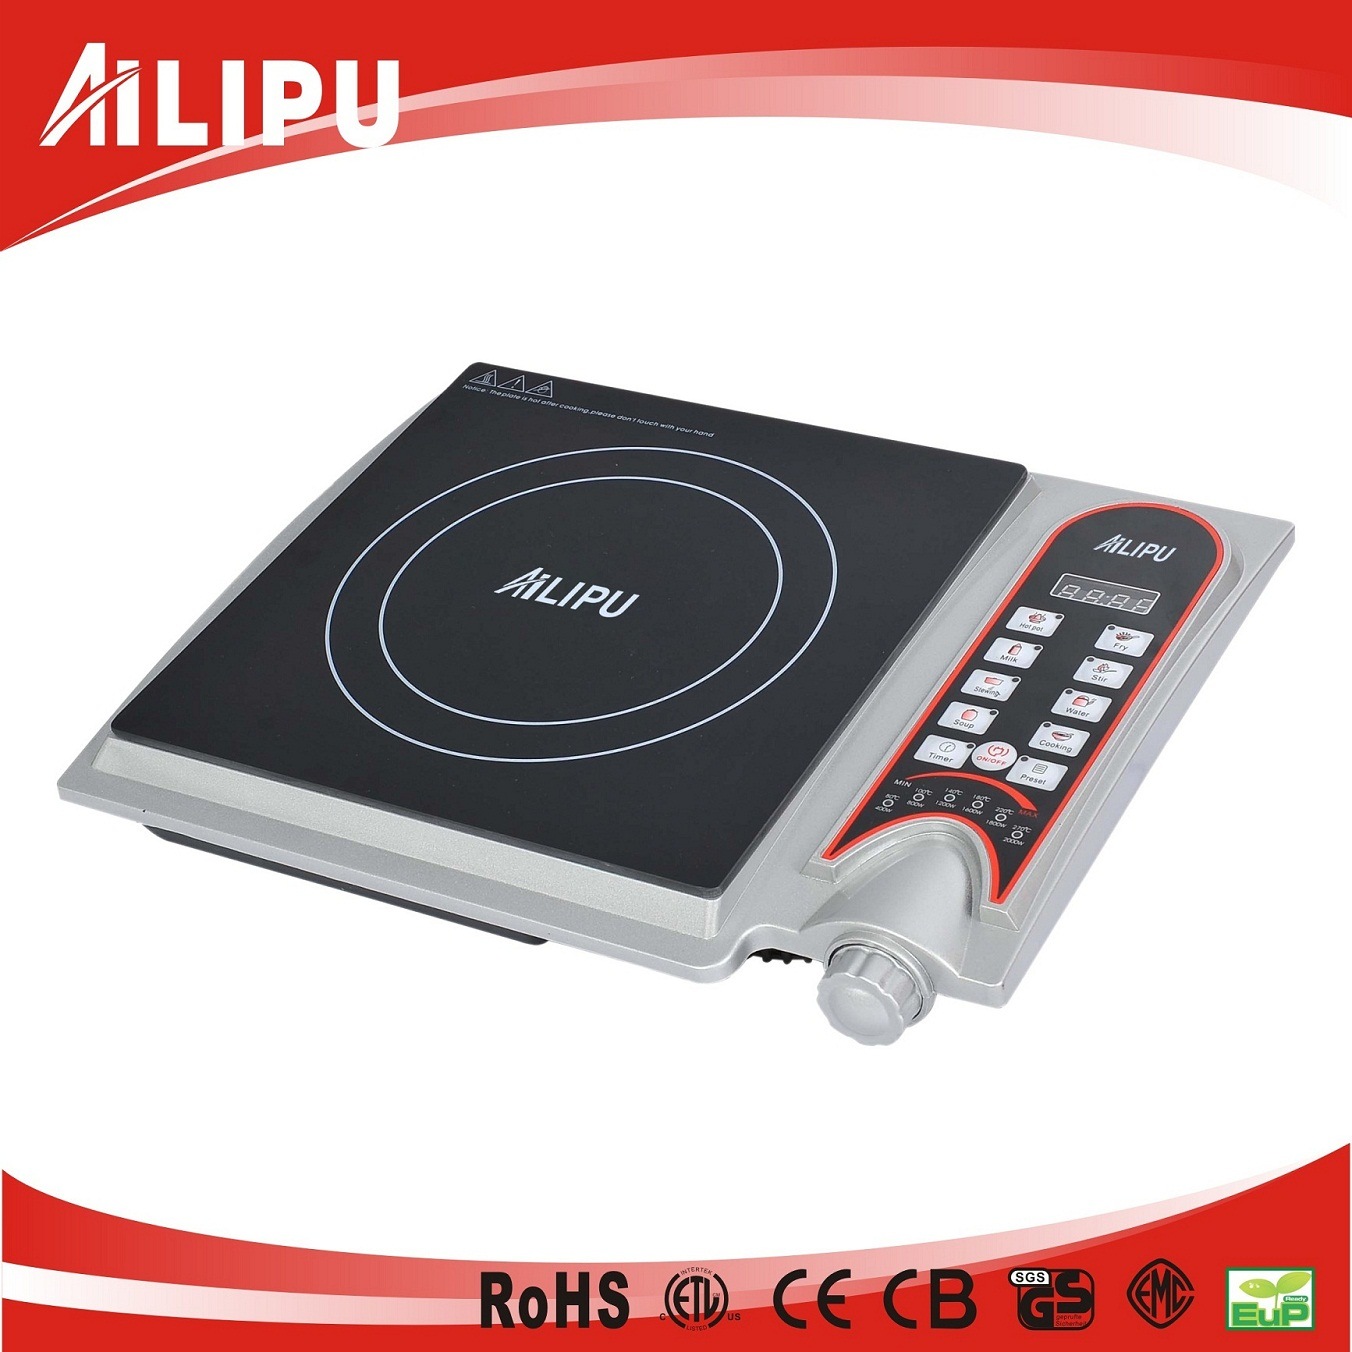 Fashion Cookware of Home Appliance, Induction Cooker, New Product of Kitchenware, Electric Cookware, Induction Plate, Promotional Gift (SM-A35)